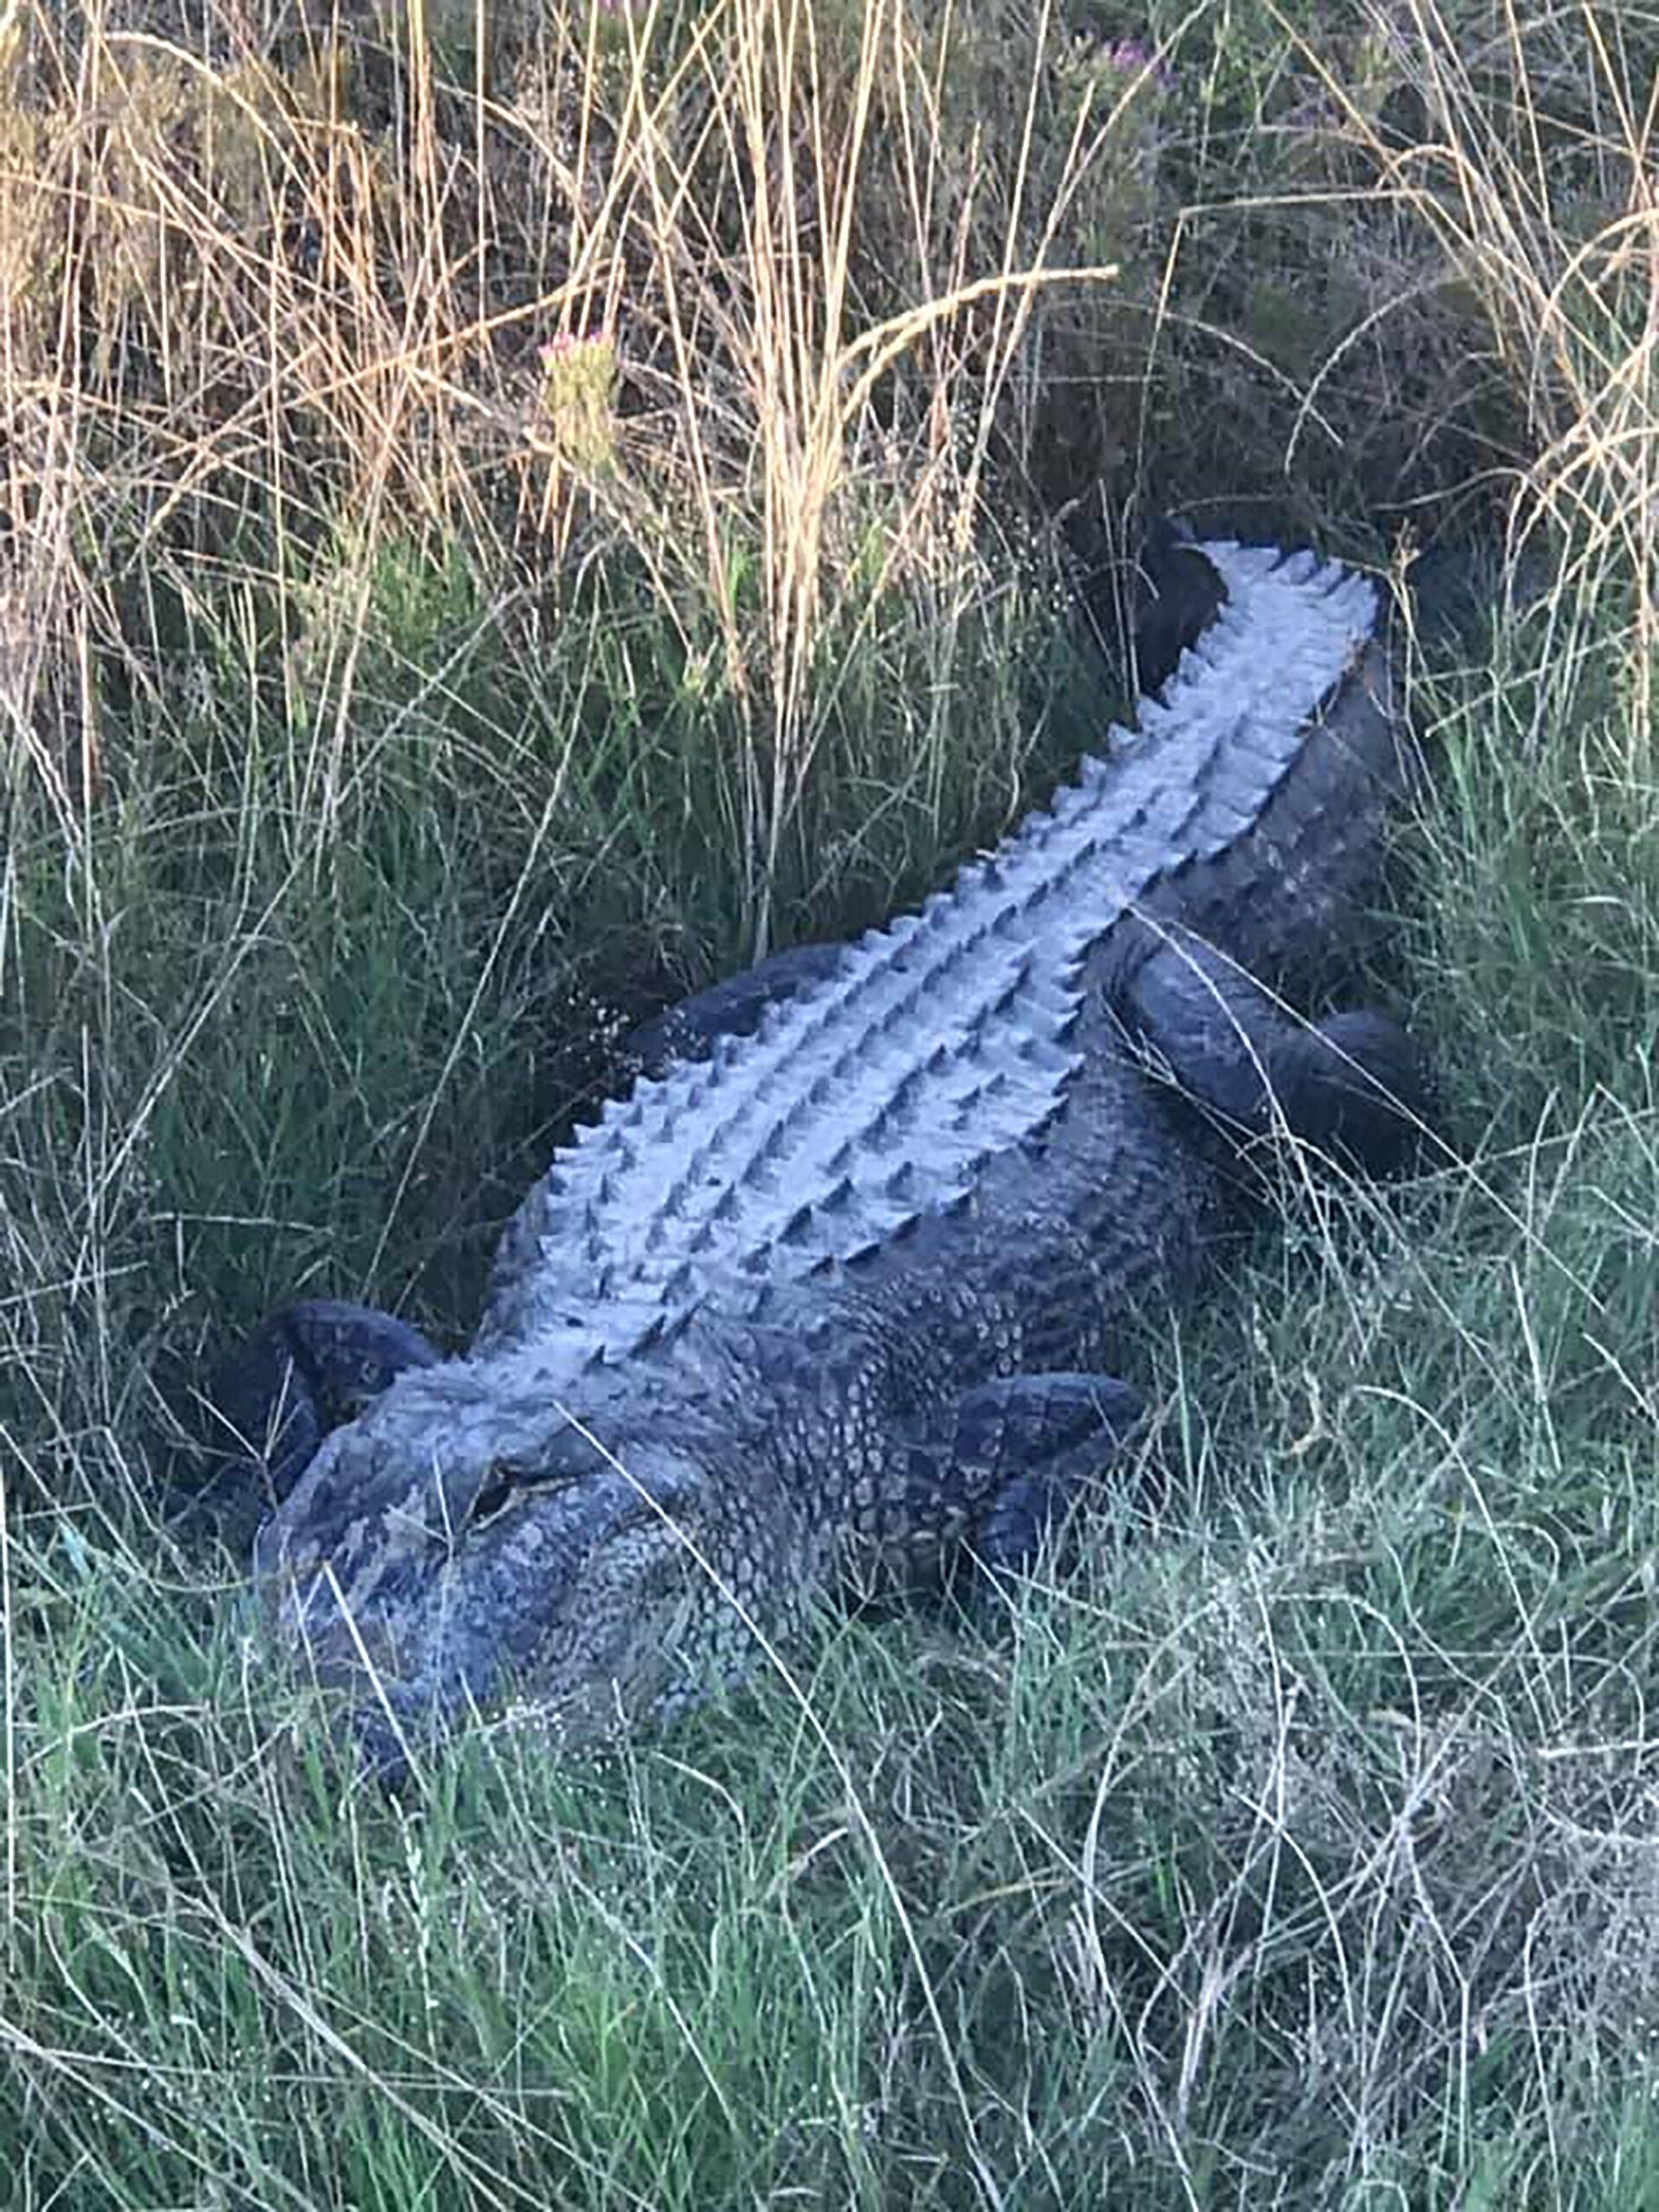 'Only In Florida': 8-Foot Gator Results In 9-1-1 Call